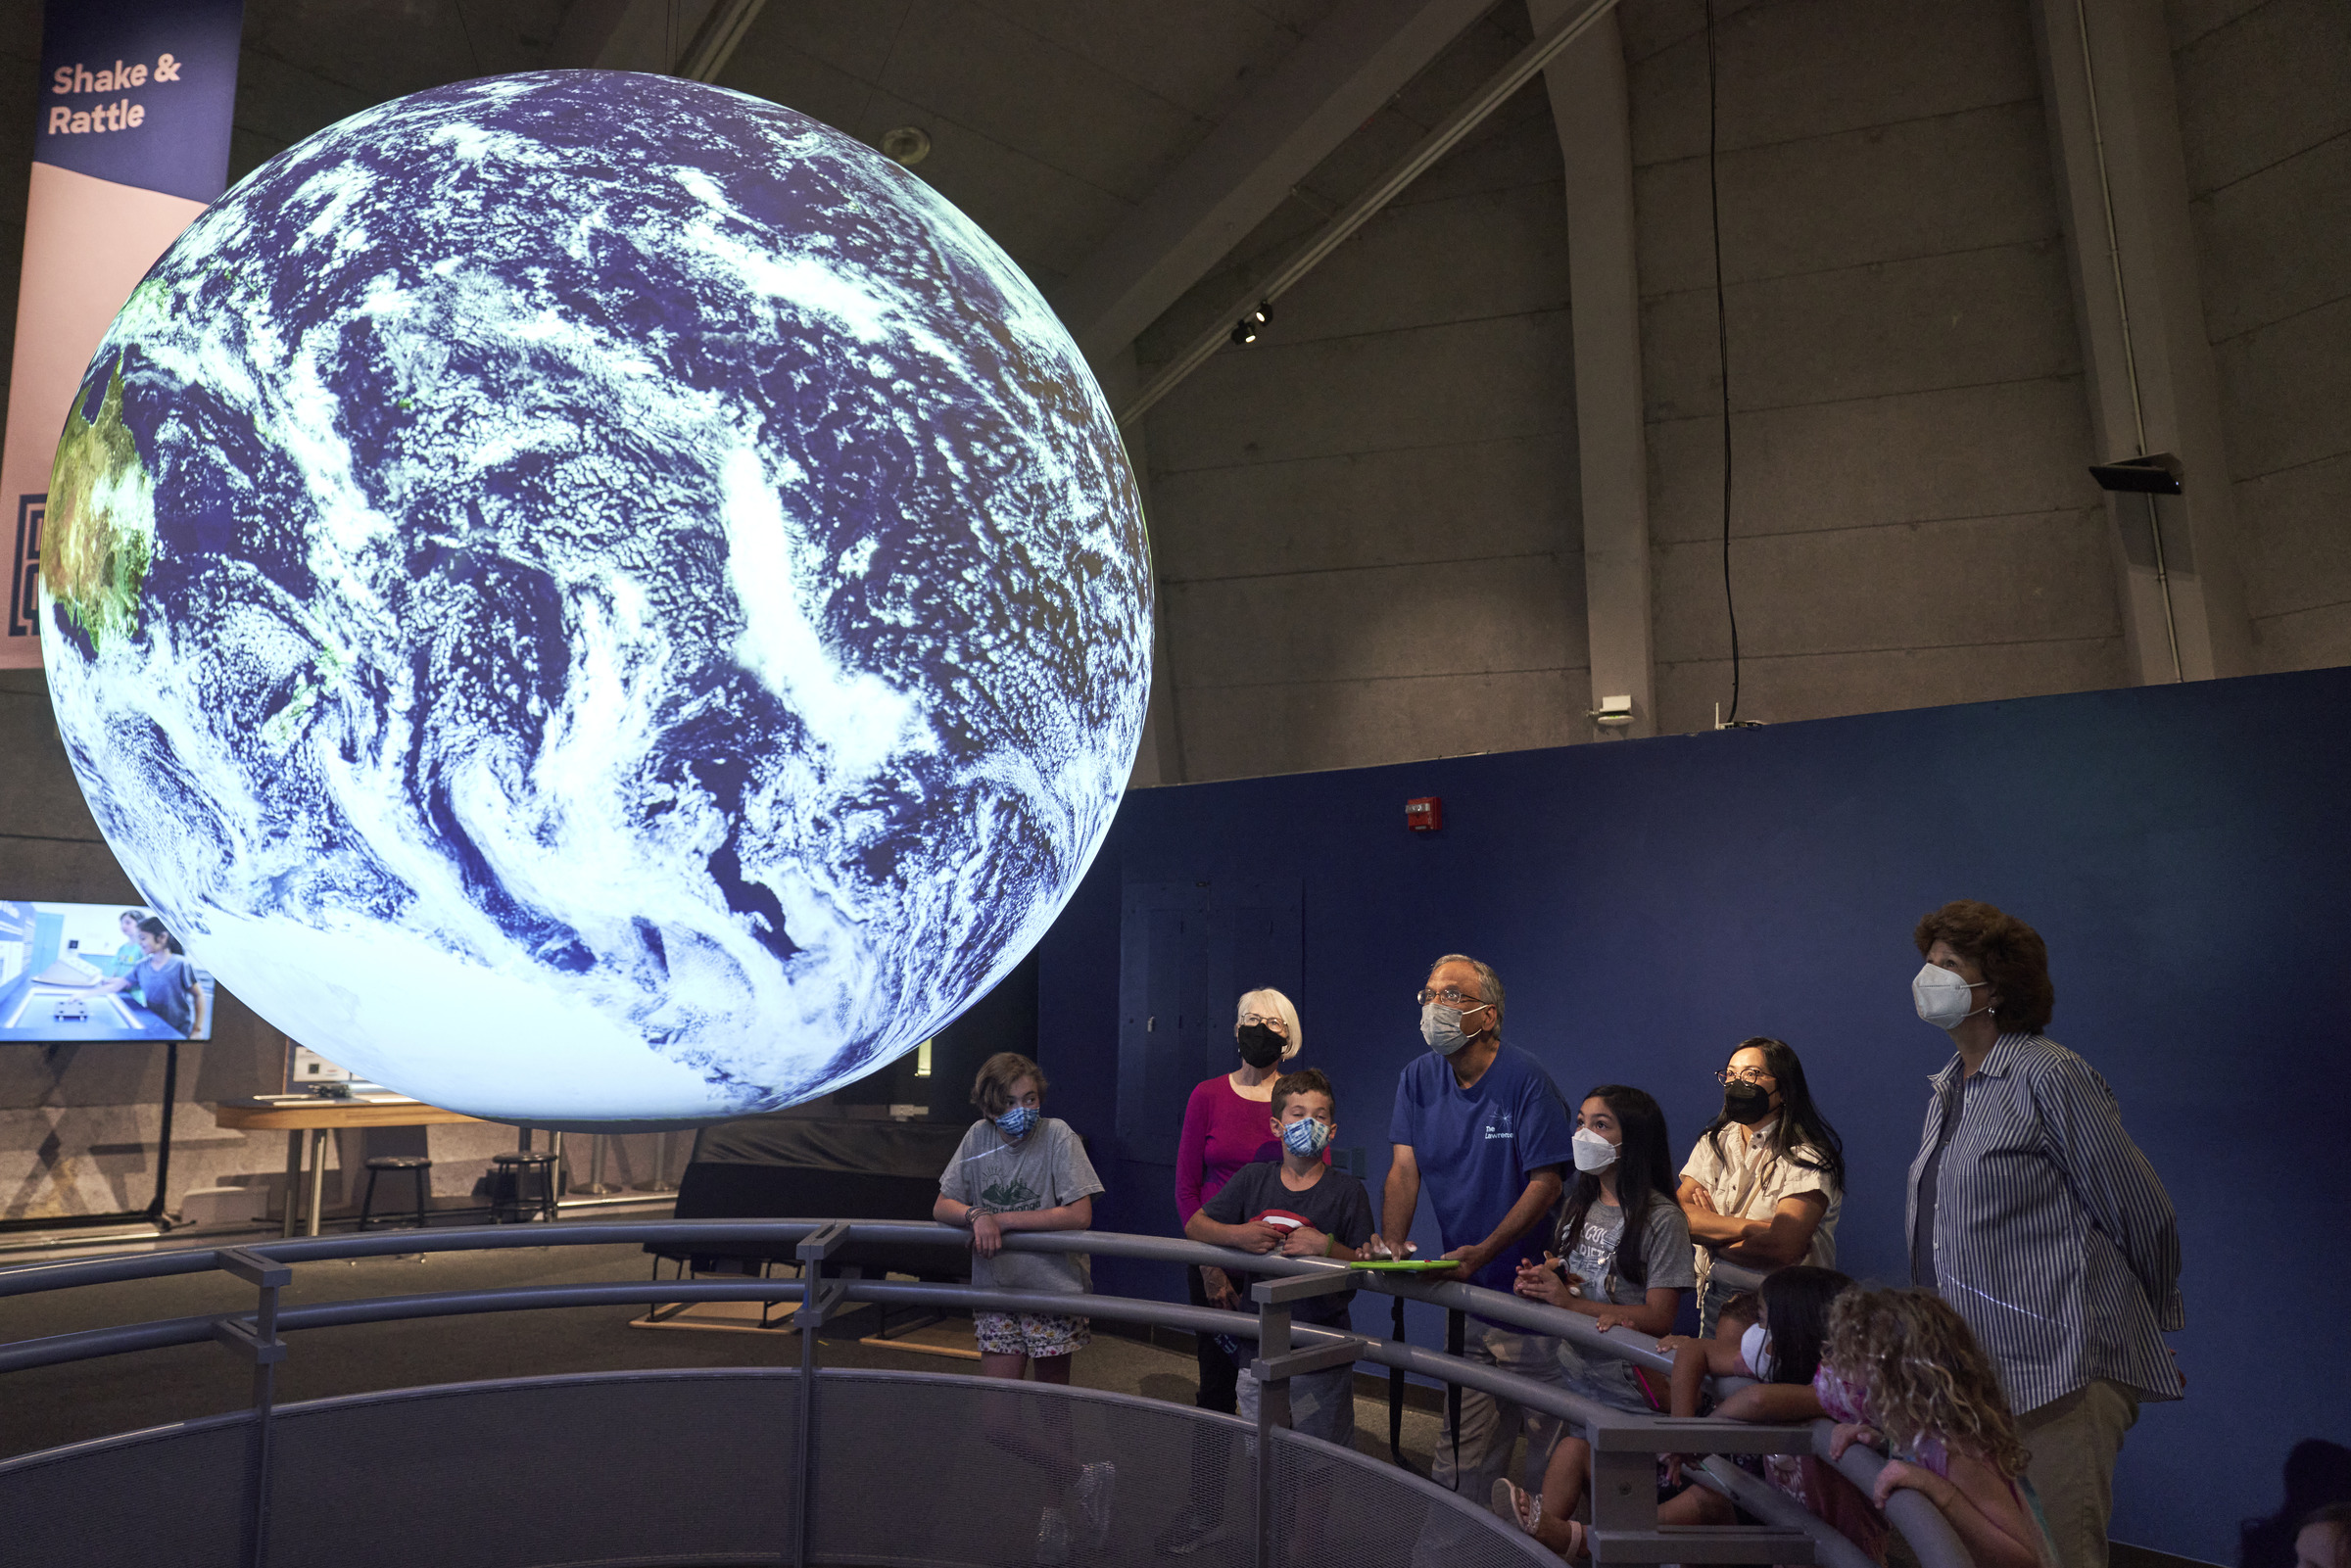 A group of visitors observing the globe projected on Science On A Sphere